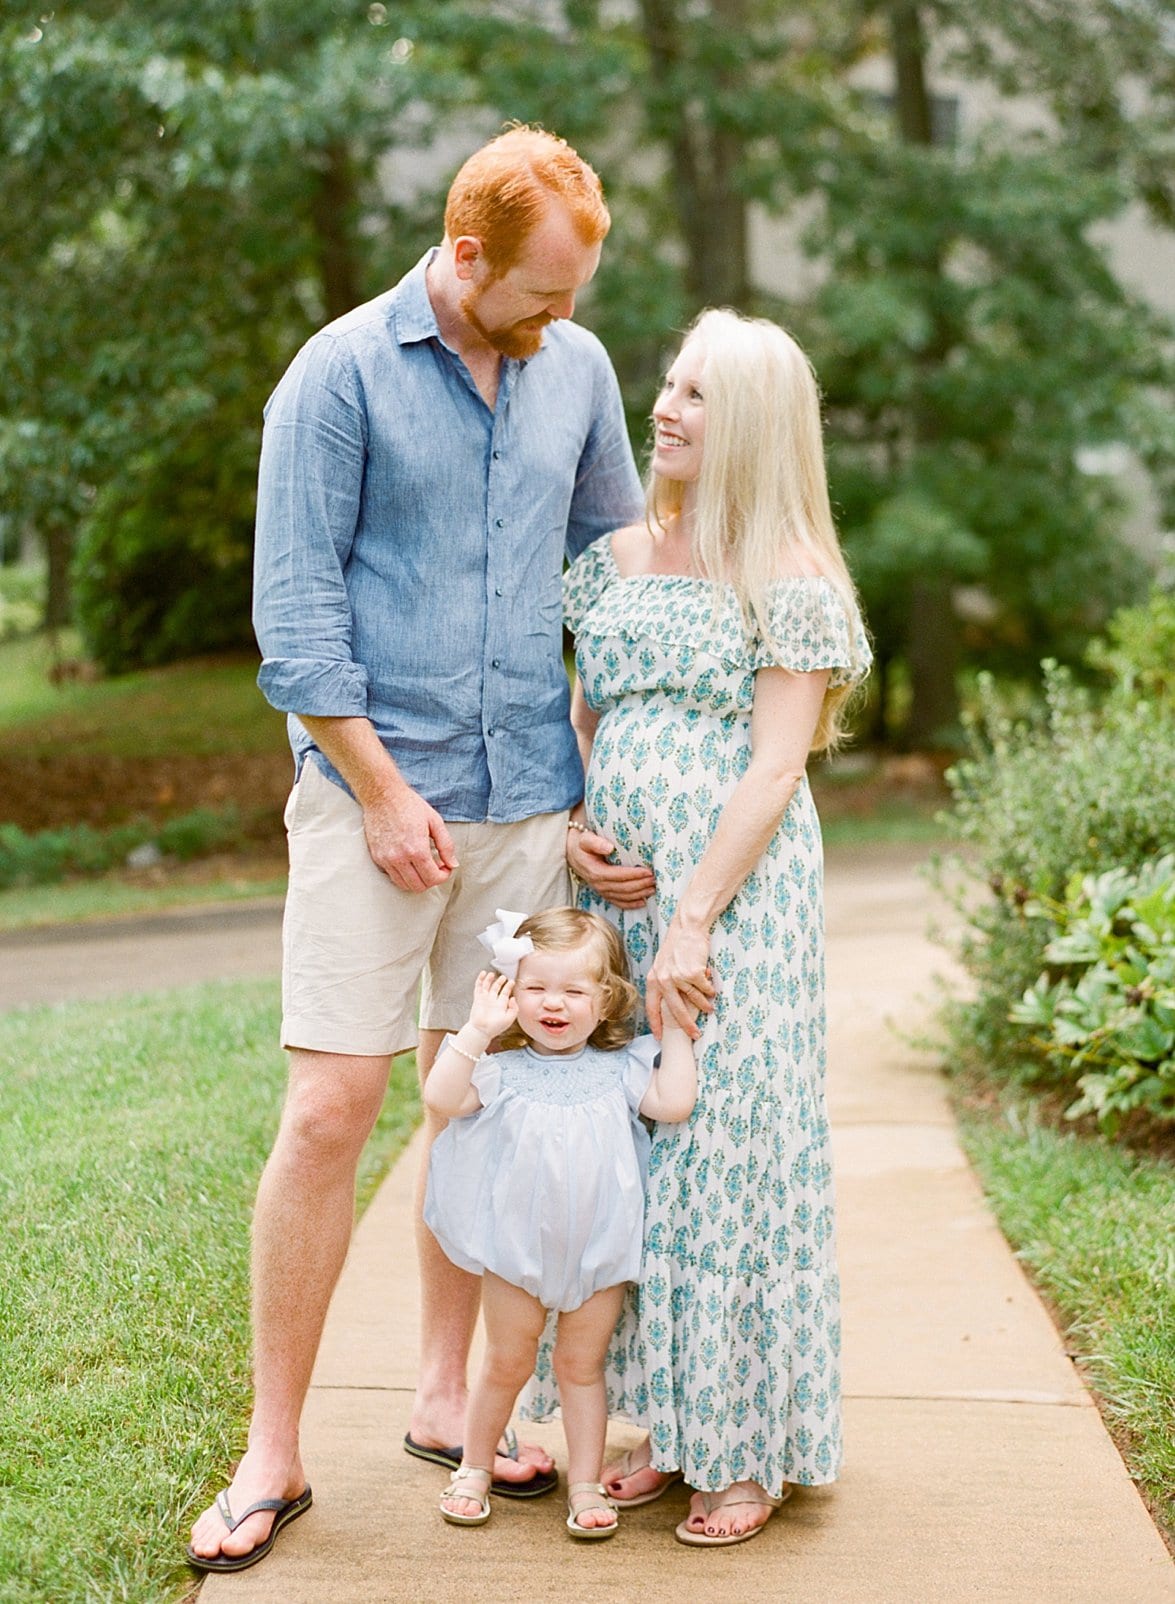  asheville, nc maternity session with a toddler photo